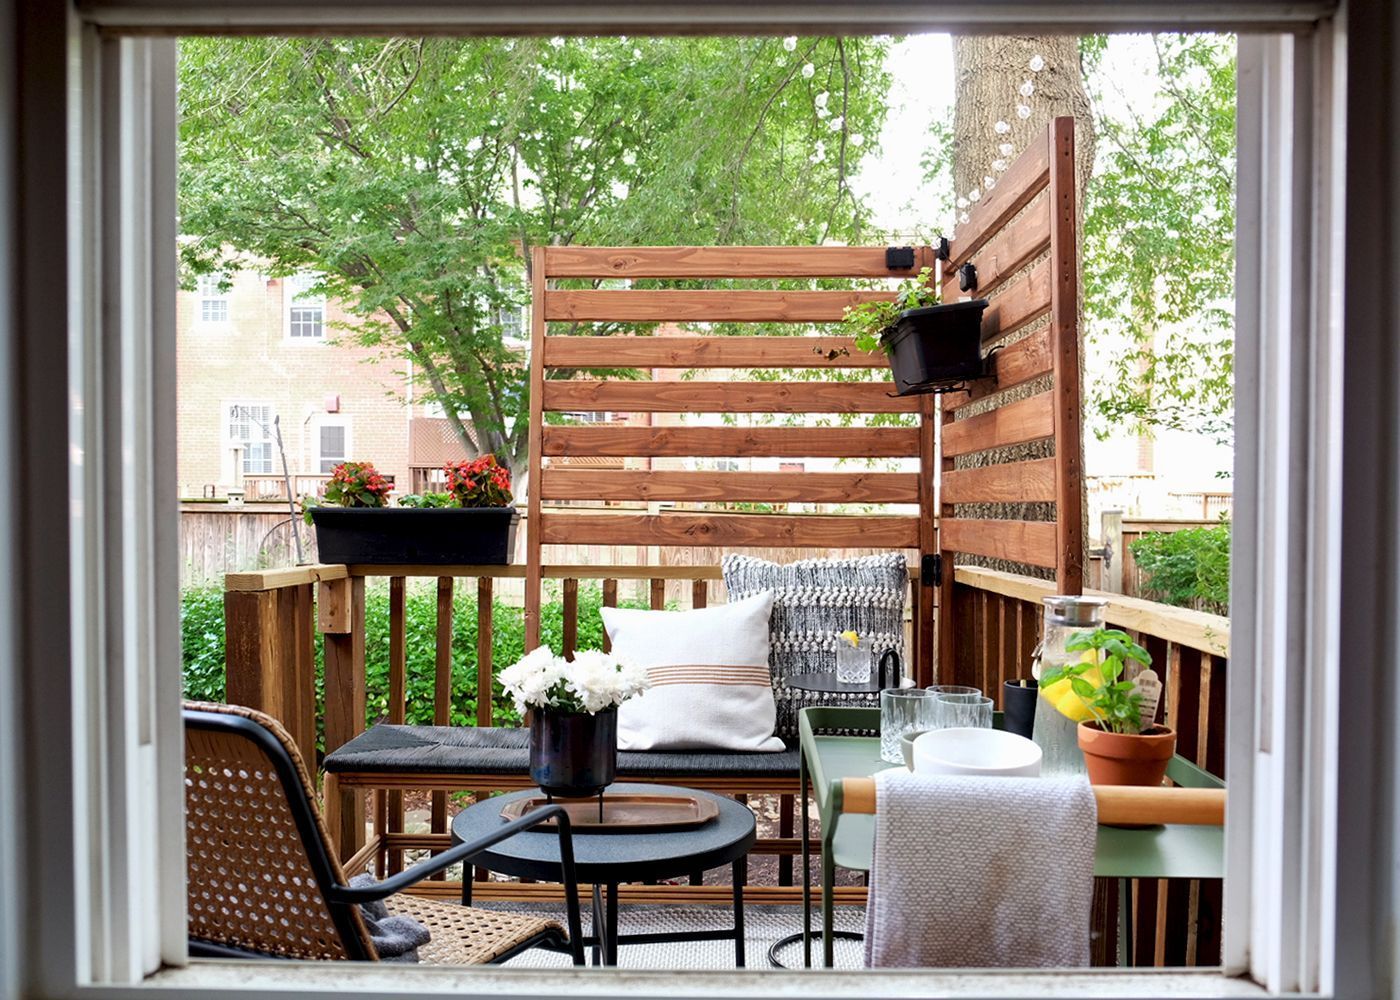 Ways To Decorate Your Open Balcony | Travelplanet In Coffee Tables For Balconies (View 10 of 20)